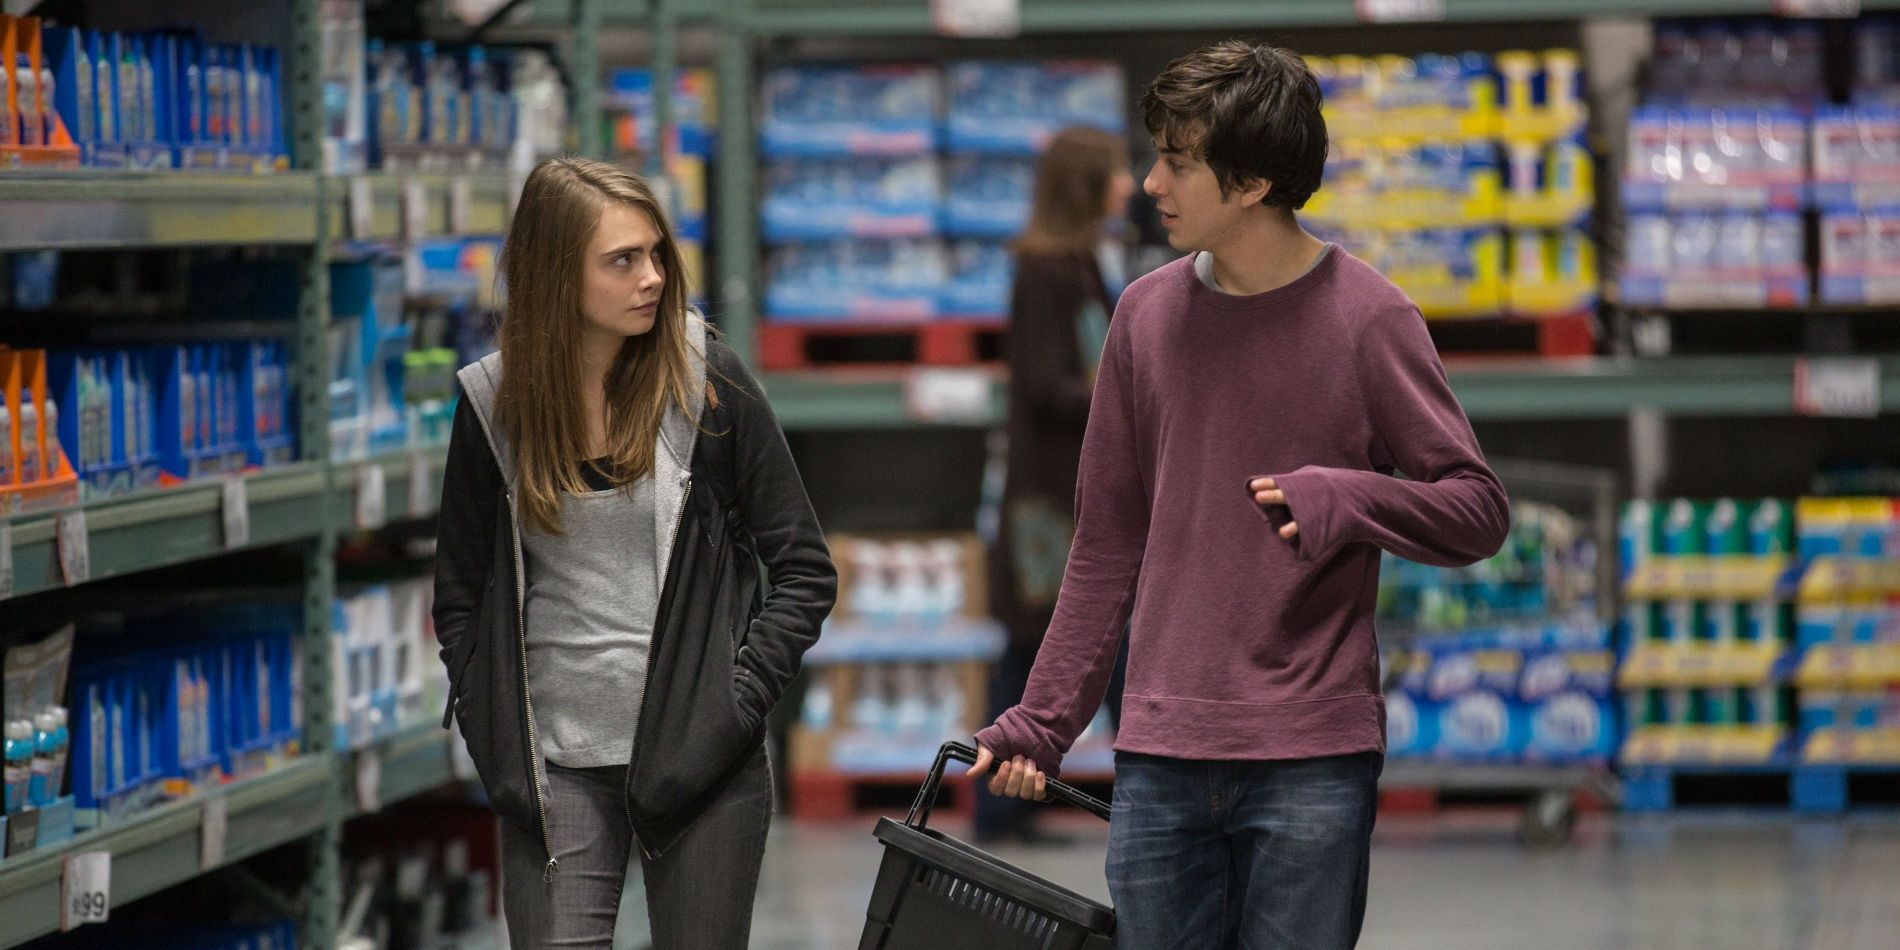 Margo (Cara Delevigne) &amp; Quentin (Nat Wolff) in a store together in Paper Towns